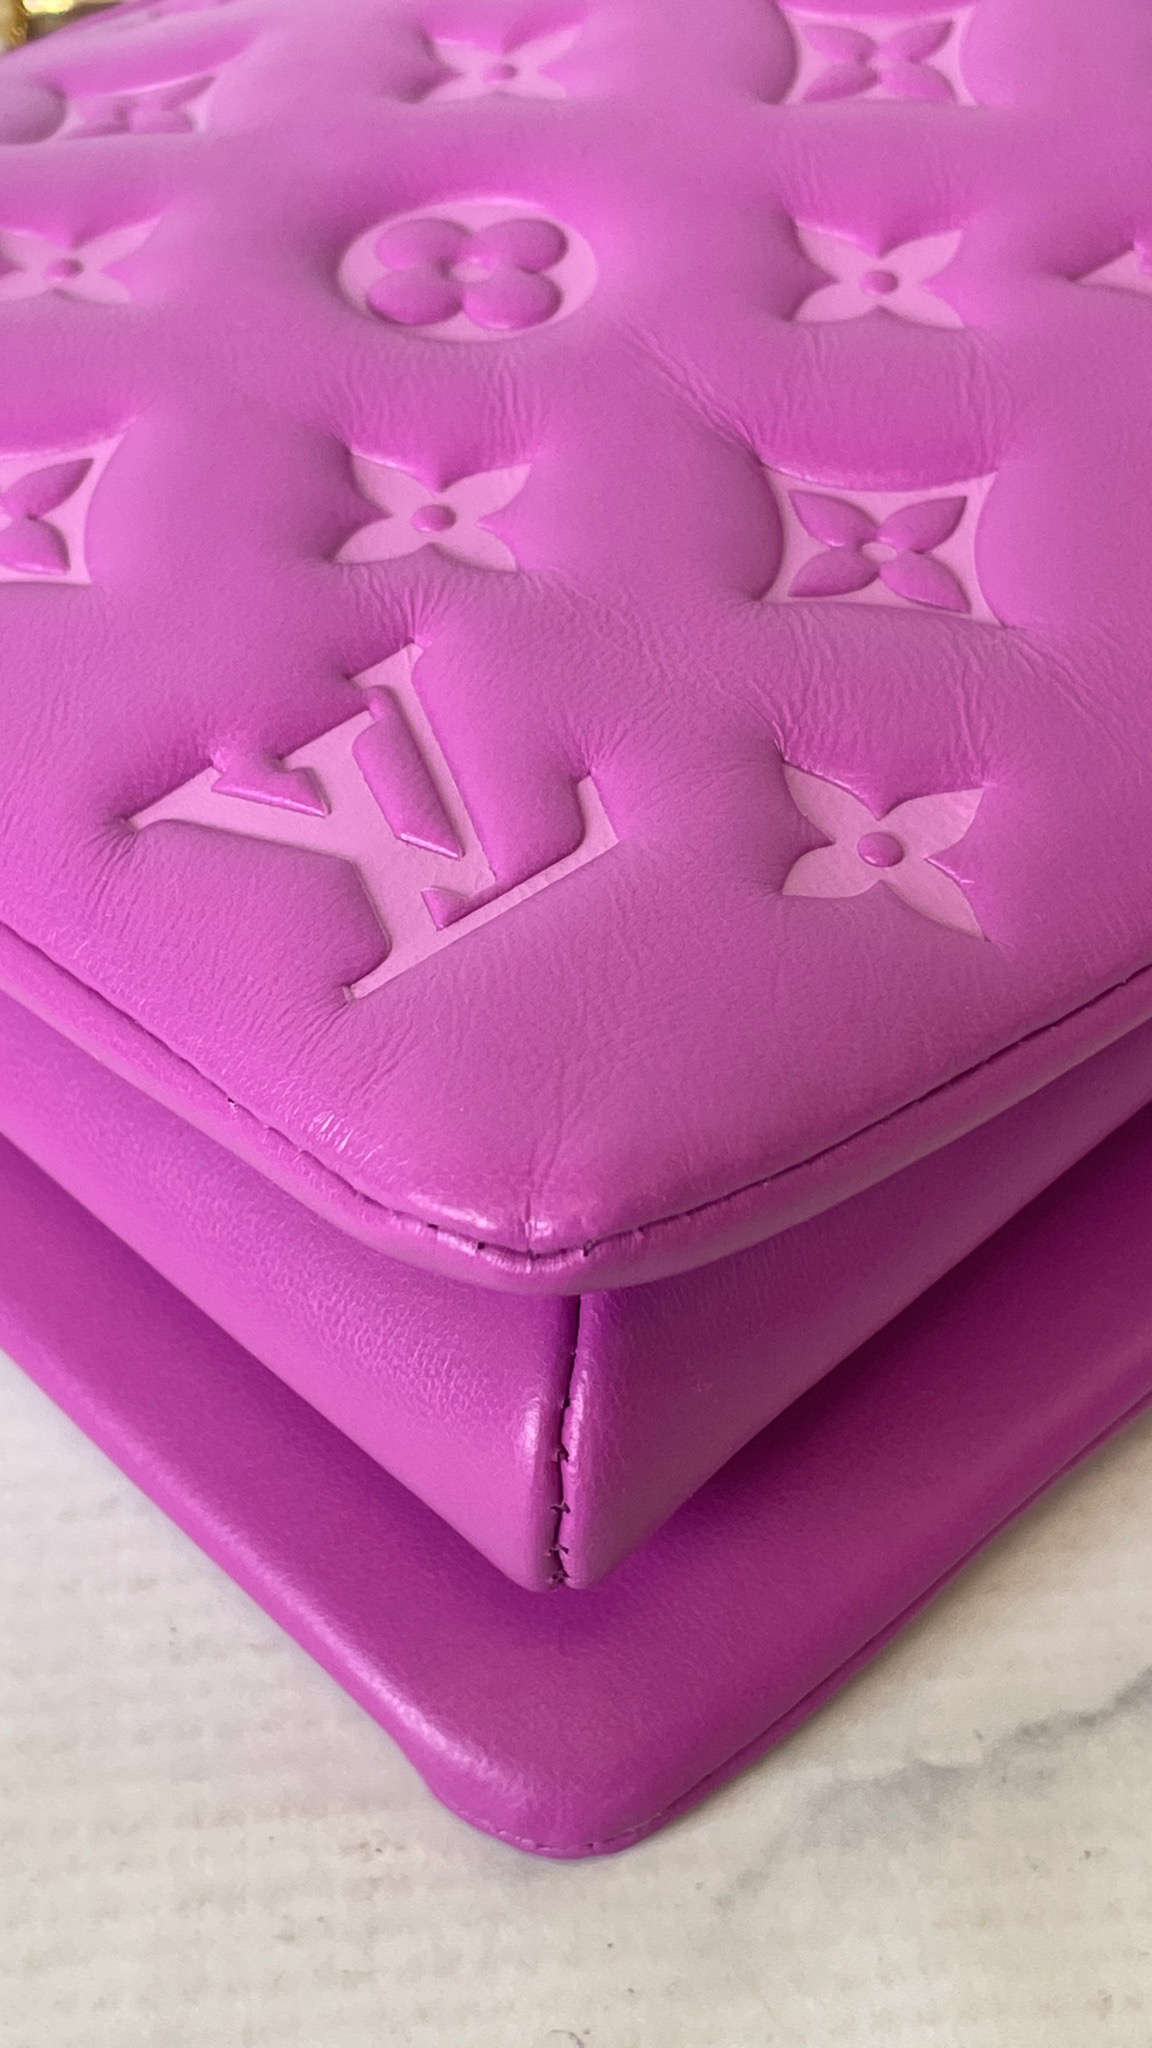 Louis Vuitton Coussin BB, Orchid Purple, New in Box WA001